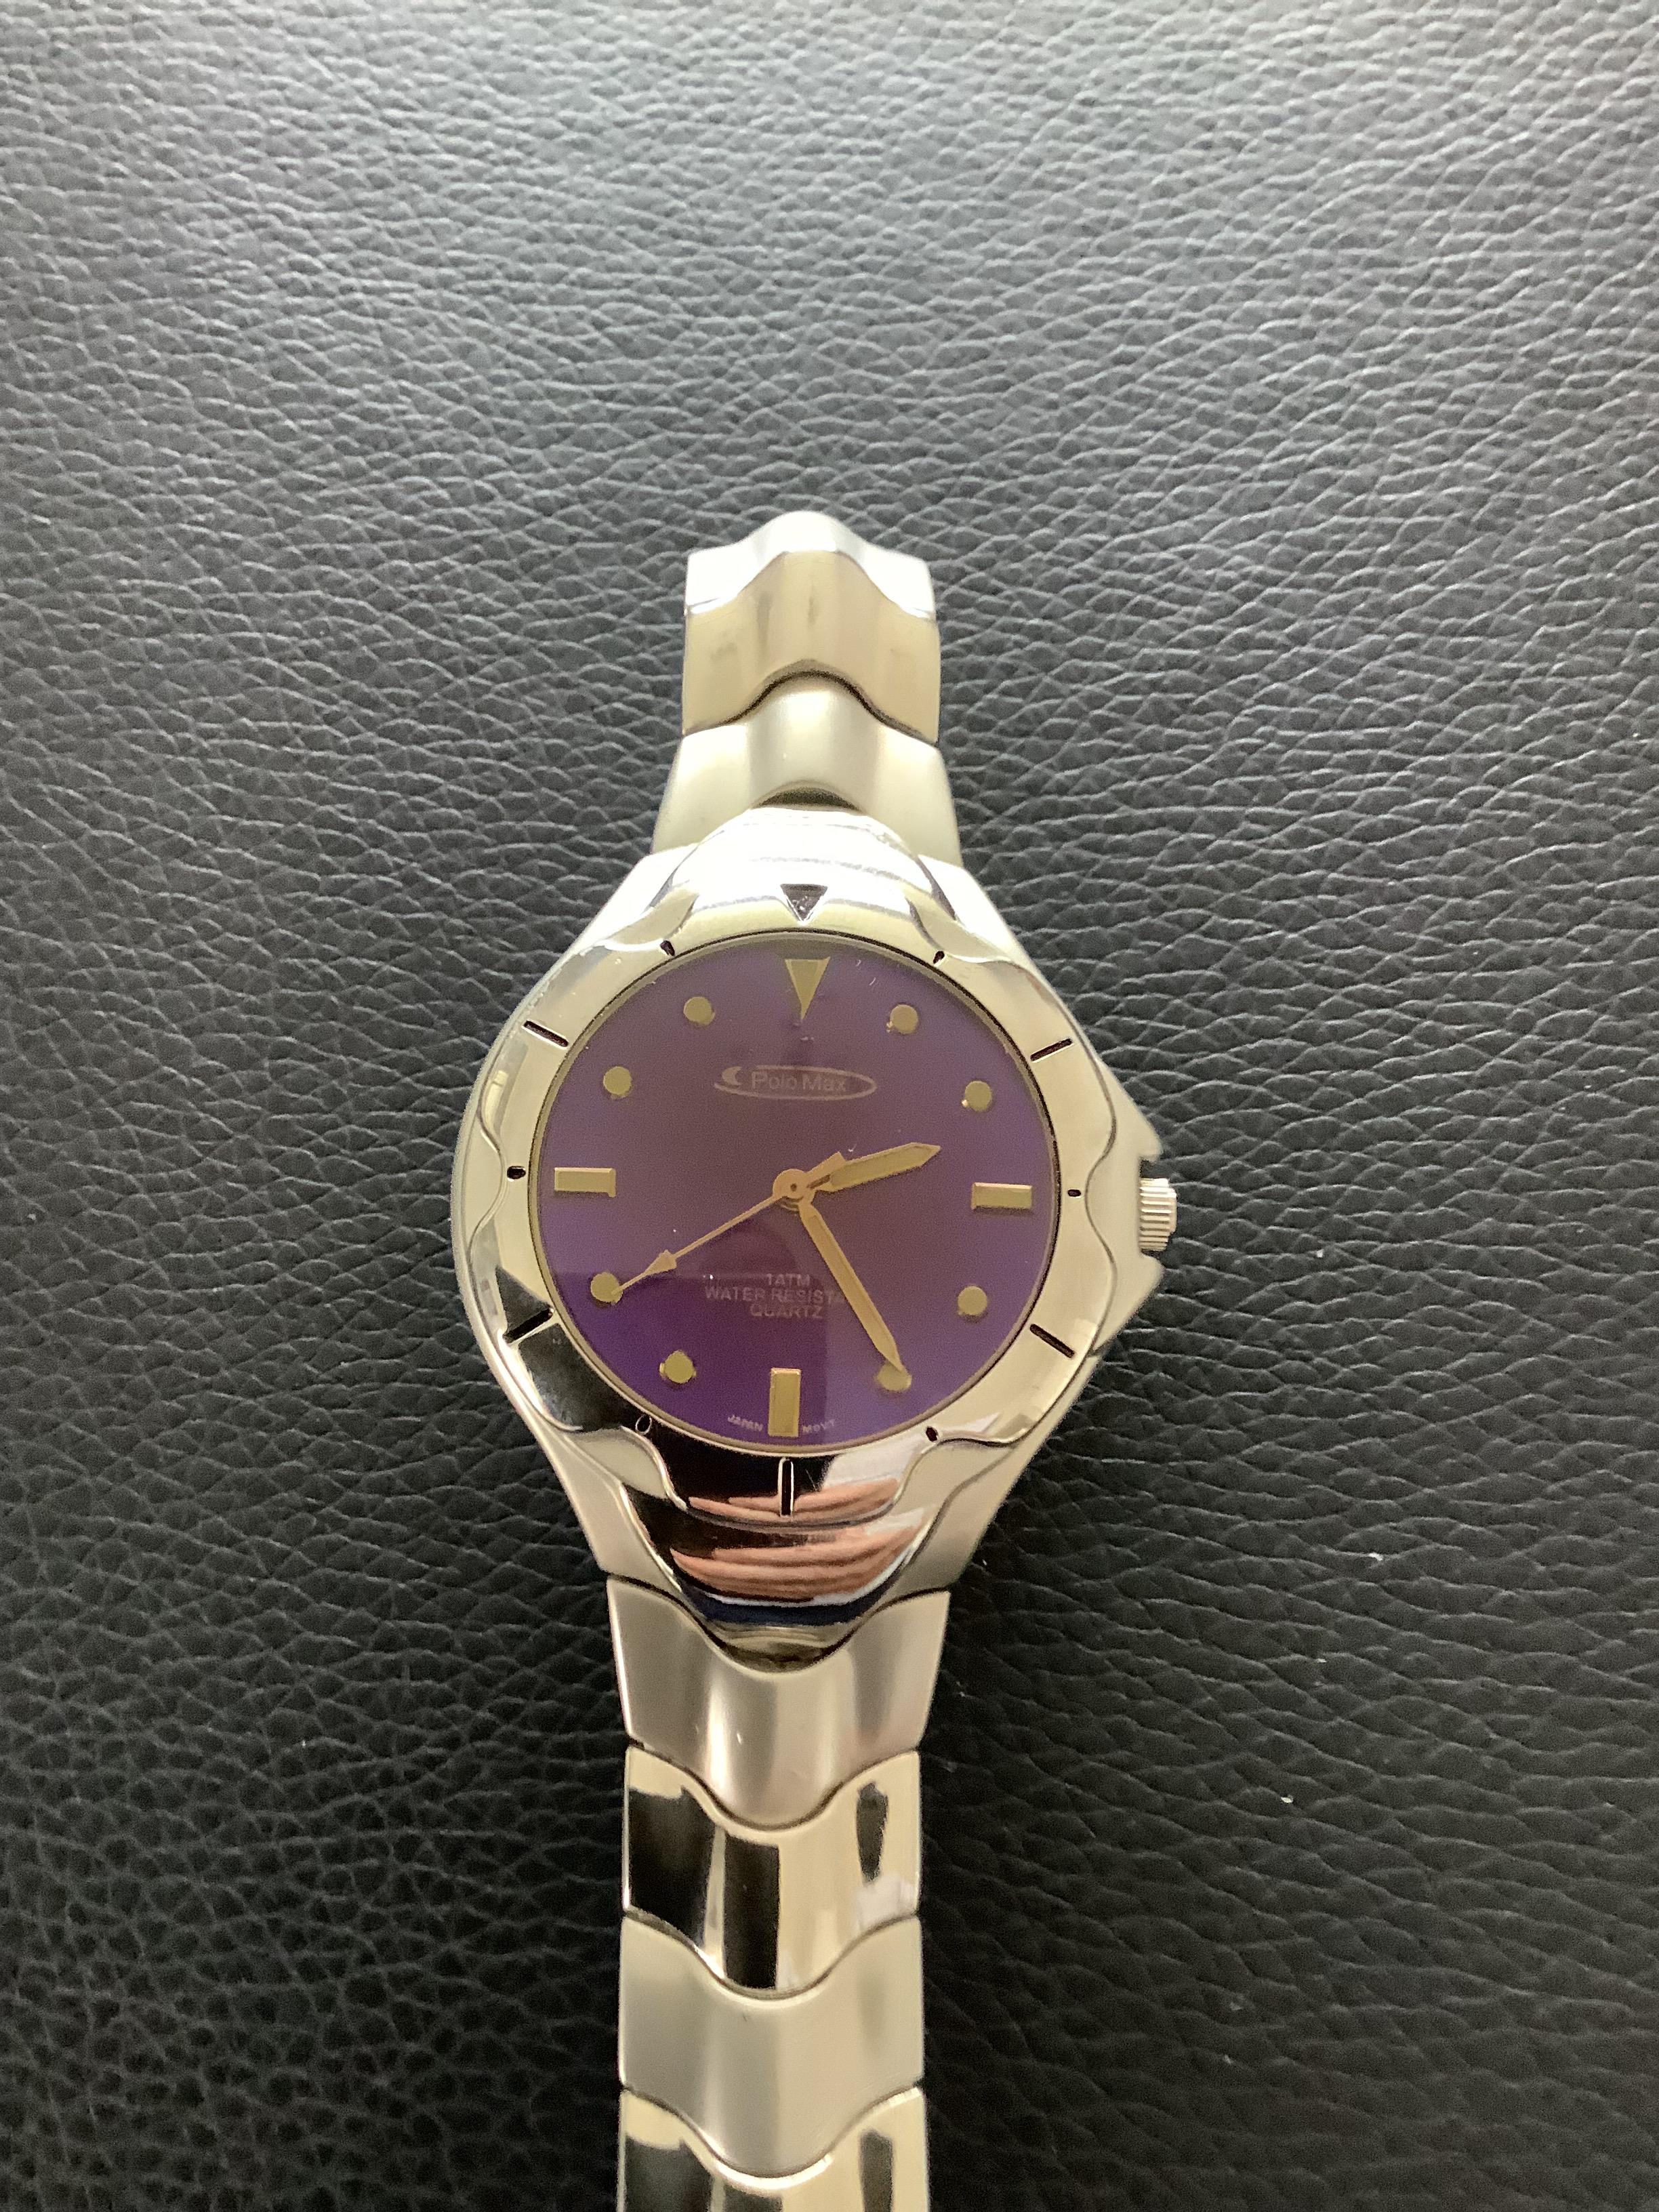 Polo Max Unisex 'As New' Wristwatch with mirror effect Face (GS 145) - Image 2 of 6